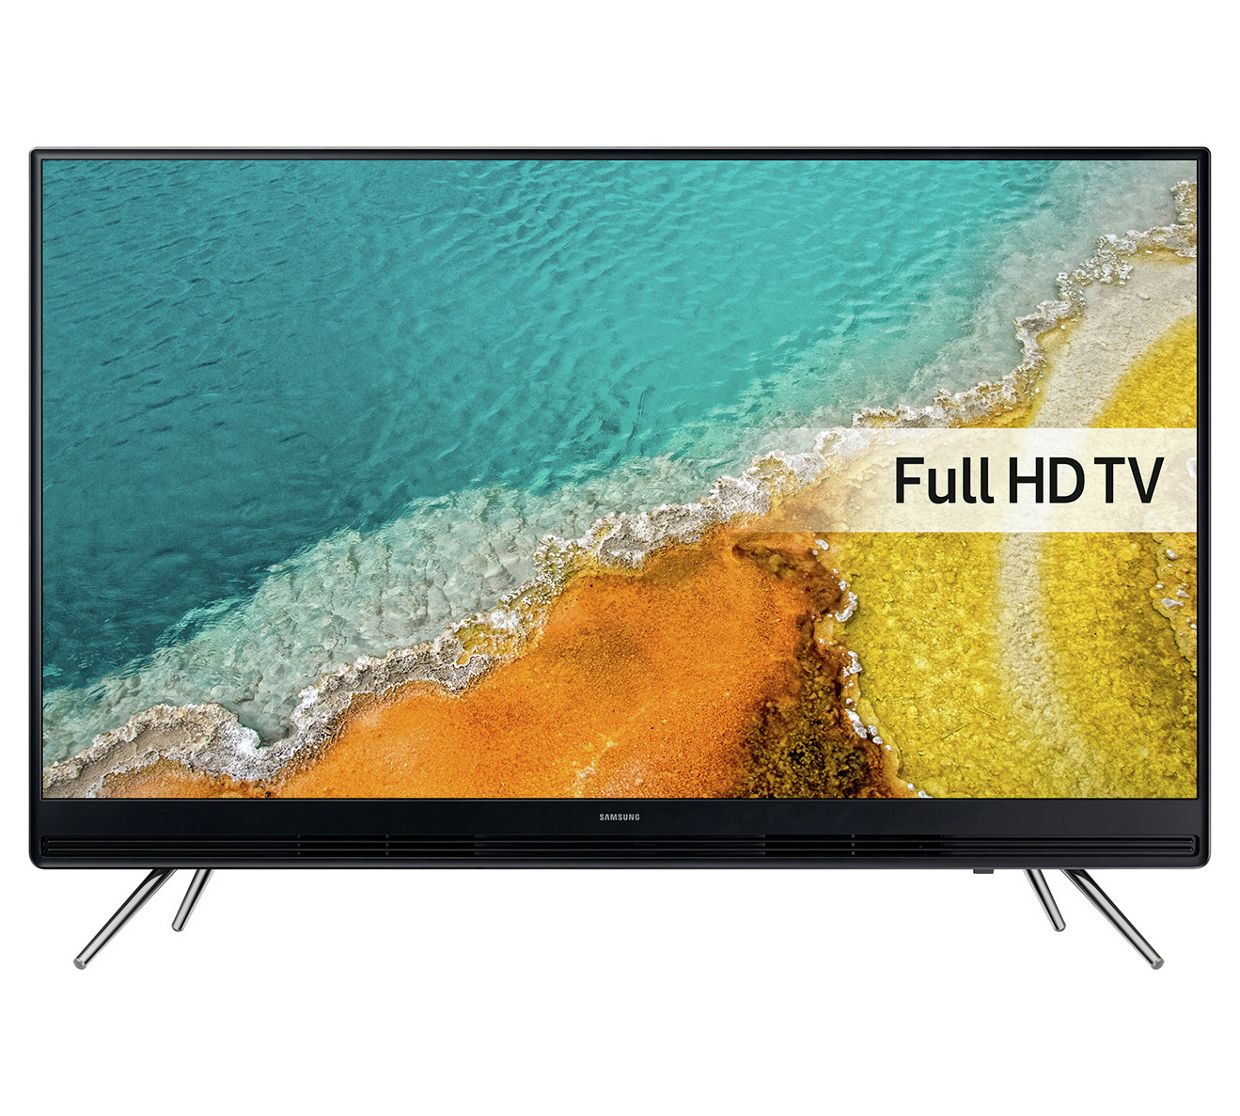 Black Friday Uk Televisions Deals And Discounts